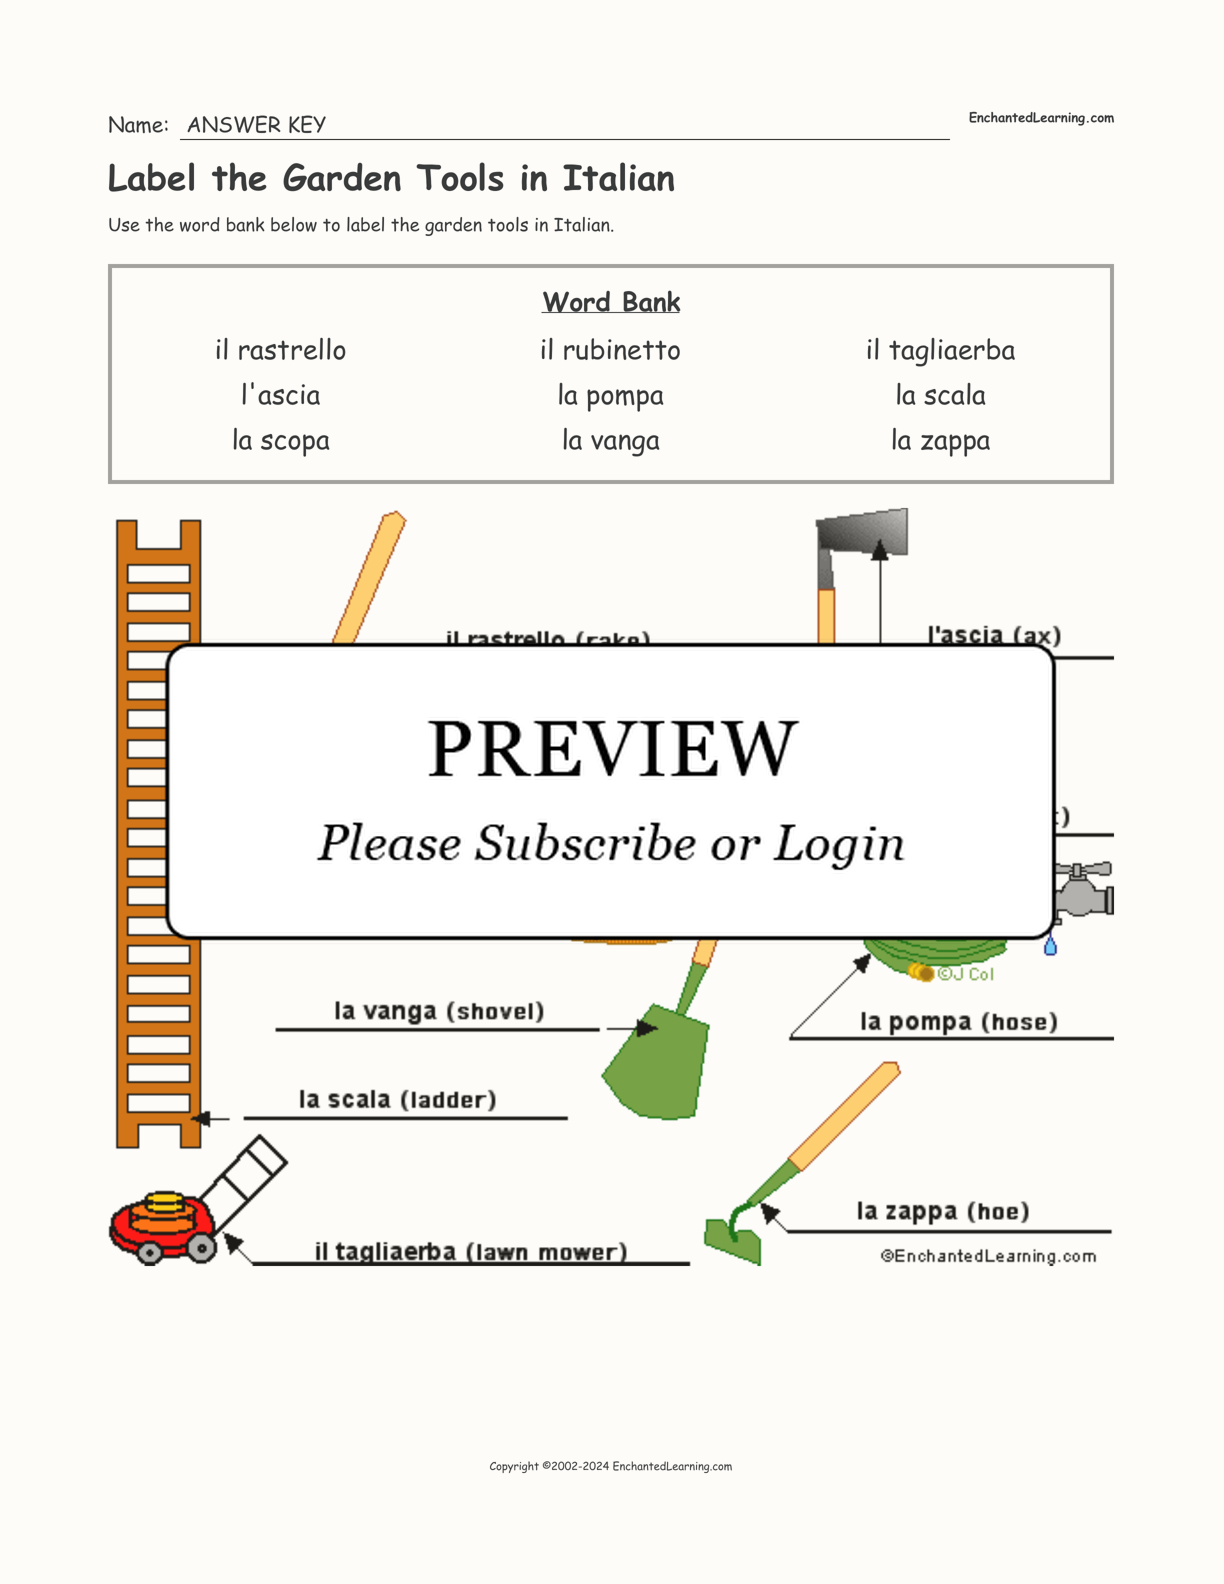 Label the Garden Tools in Italian interactive worksheet page 2